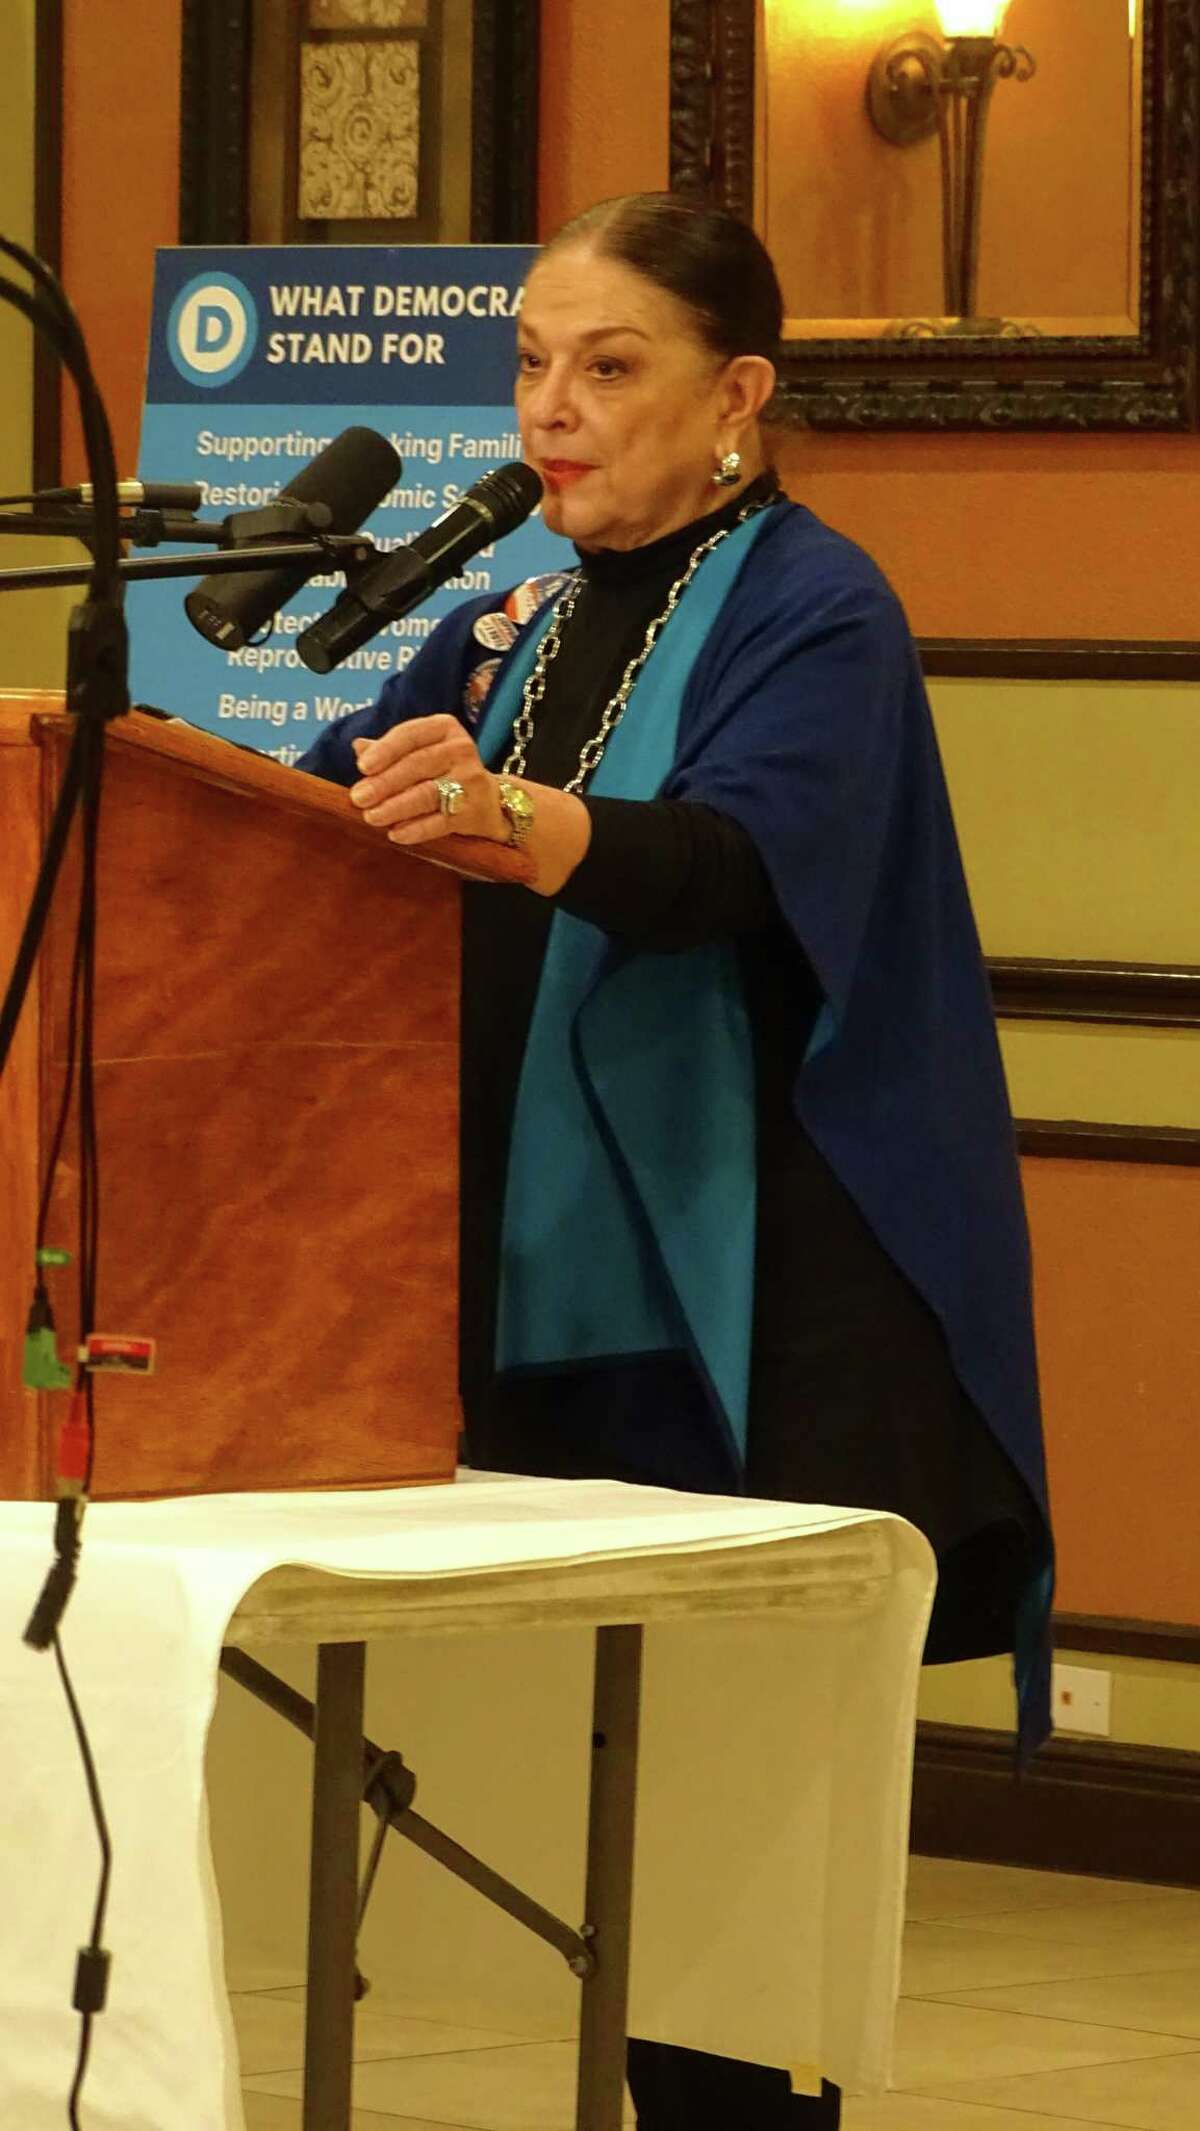 Webb County Democratic Party Chair Sylvia Bruni speaks at a Meet the Candidates event on Feb. 17, 2022.